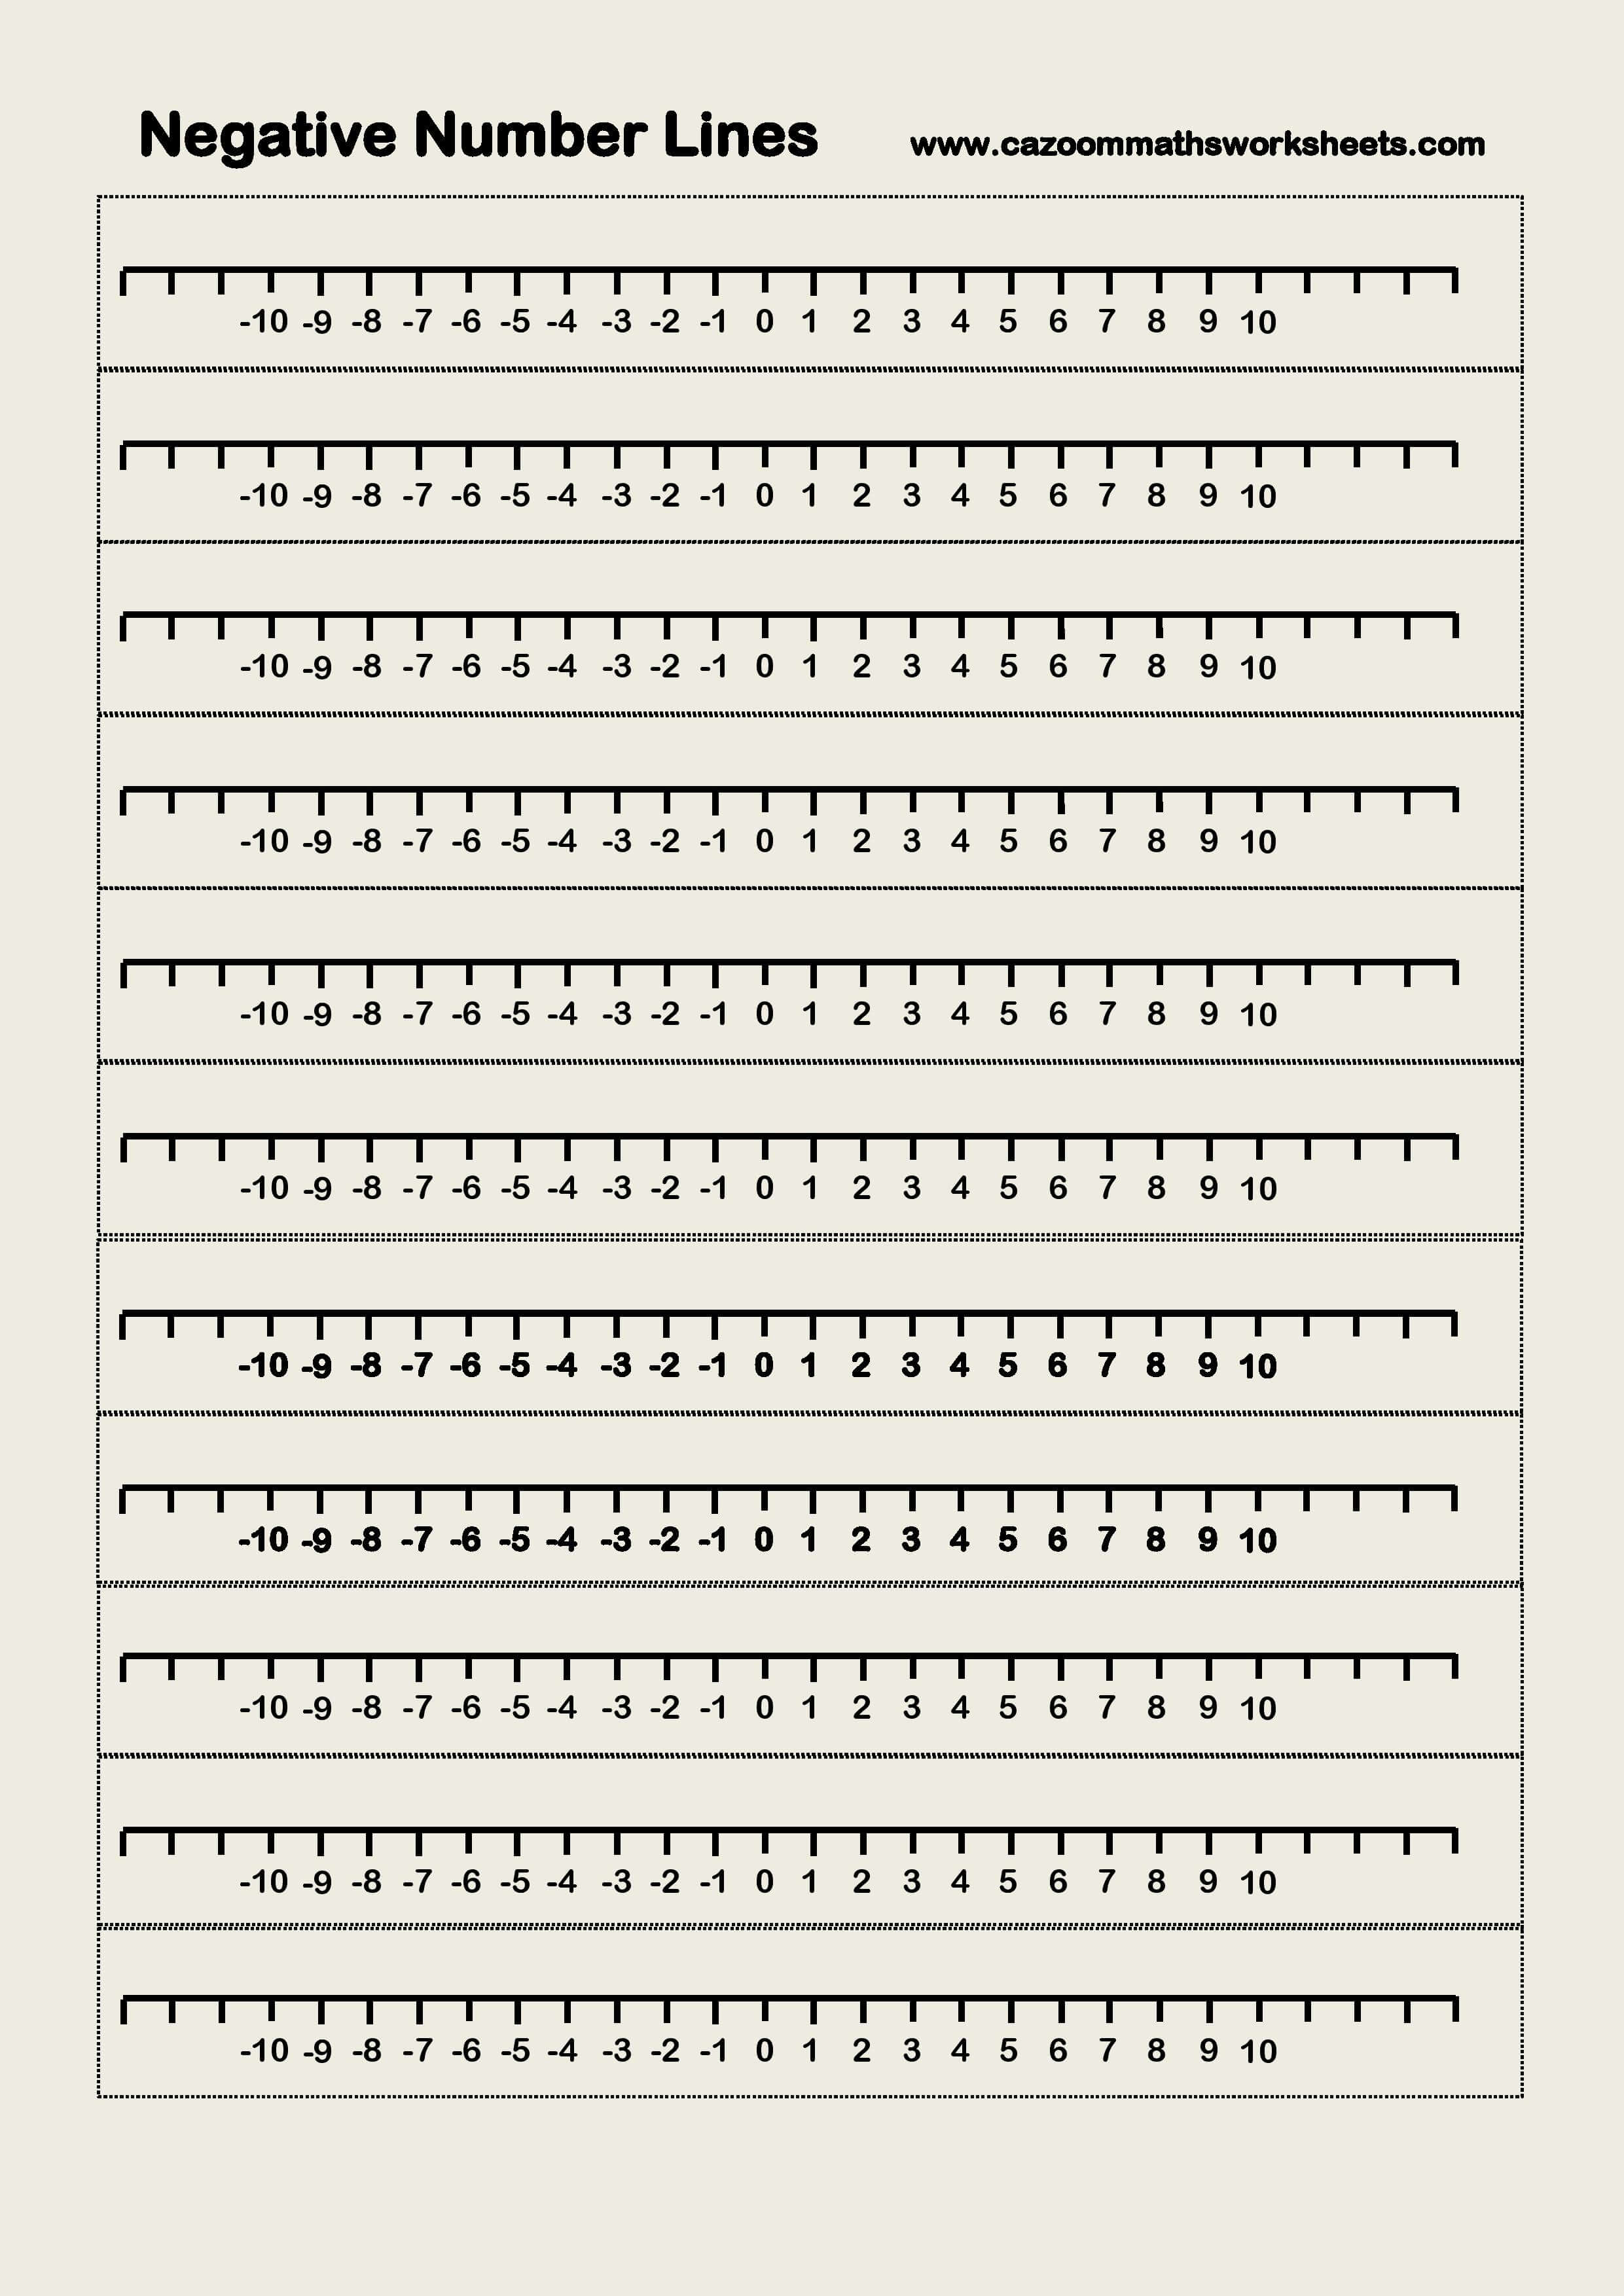 Number Lines Positive And Negative Printable